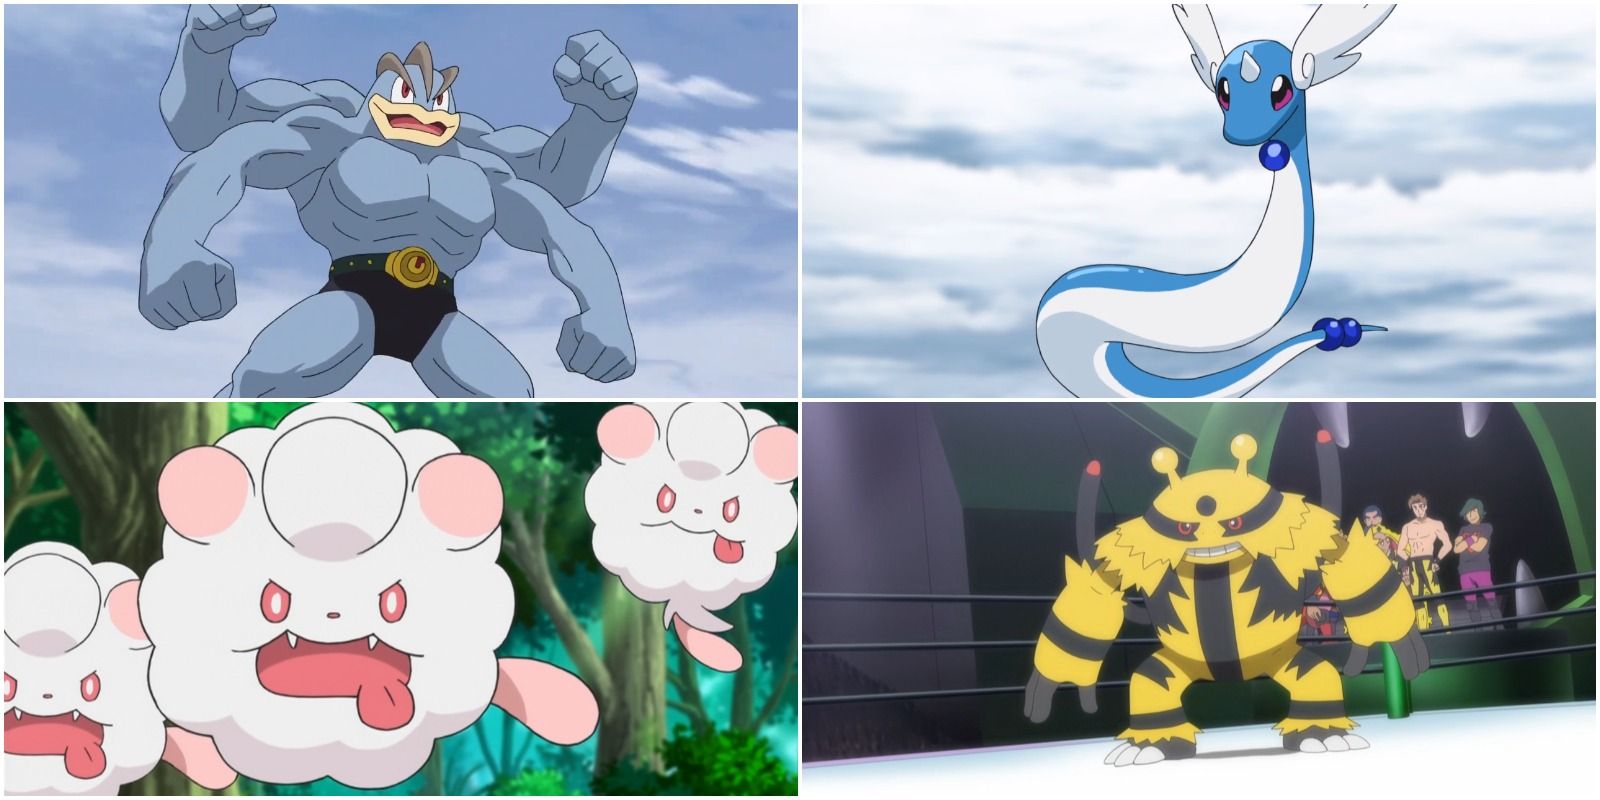 Pokemon: 10 Unused Type Combinations We Want To See In Gen 9